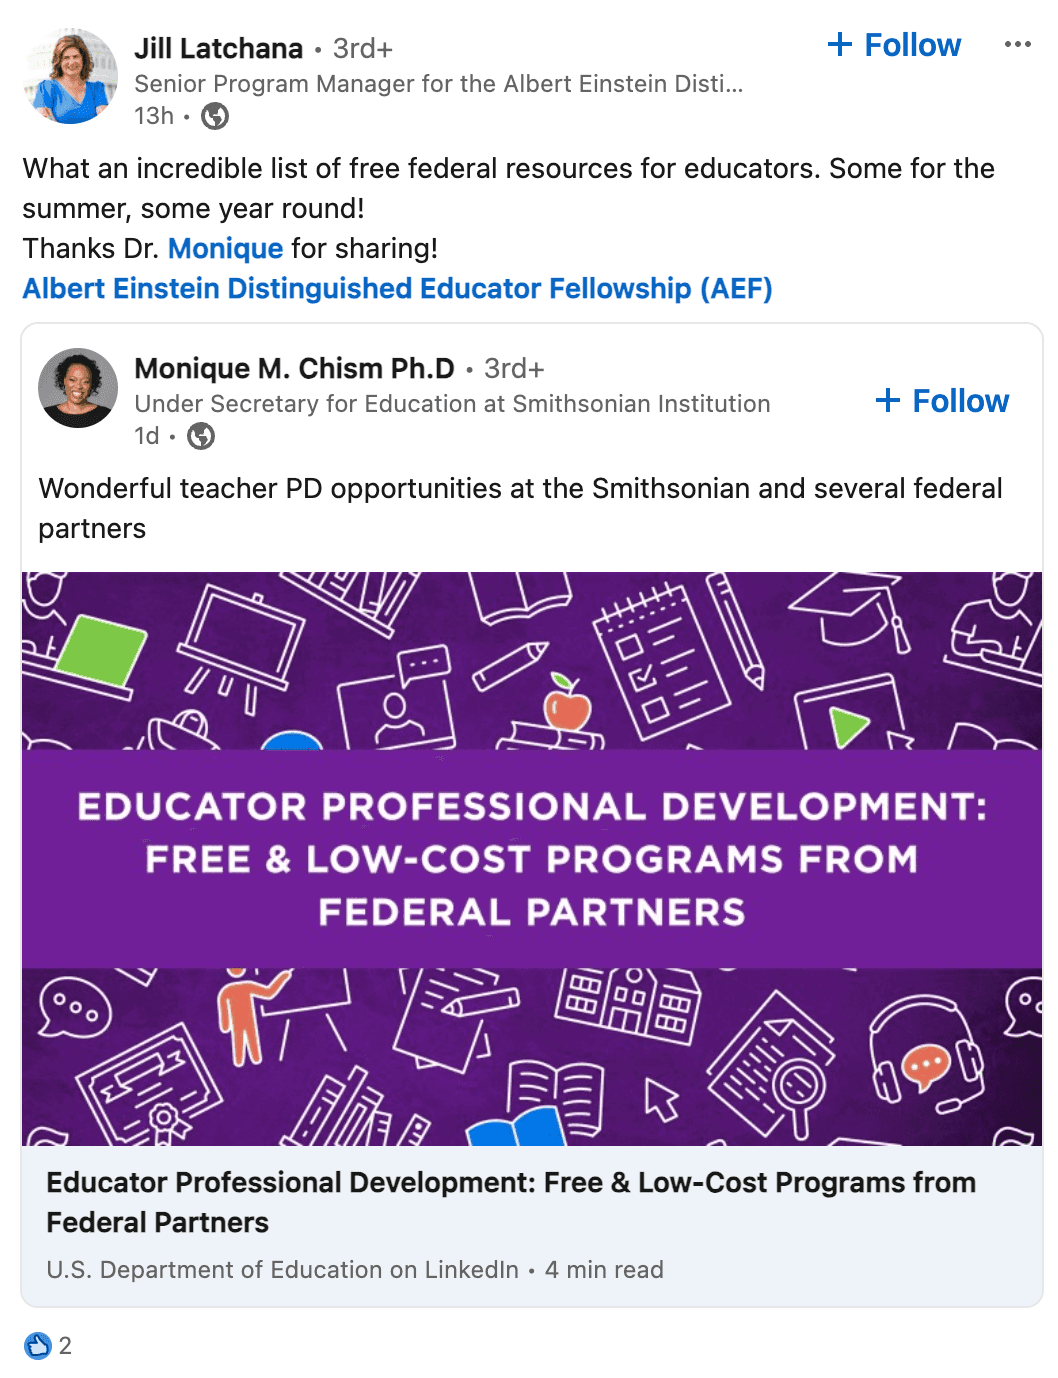 Linkedin post promoting free resources